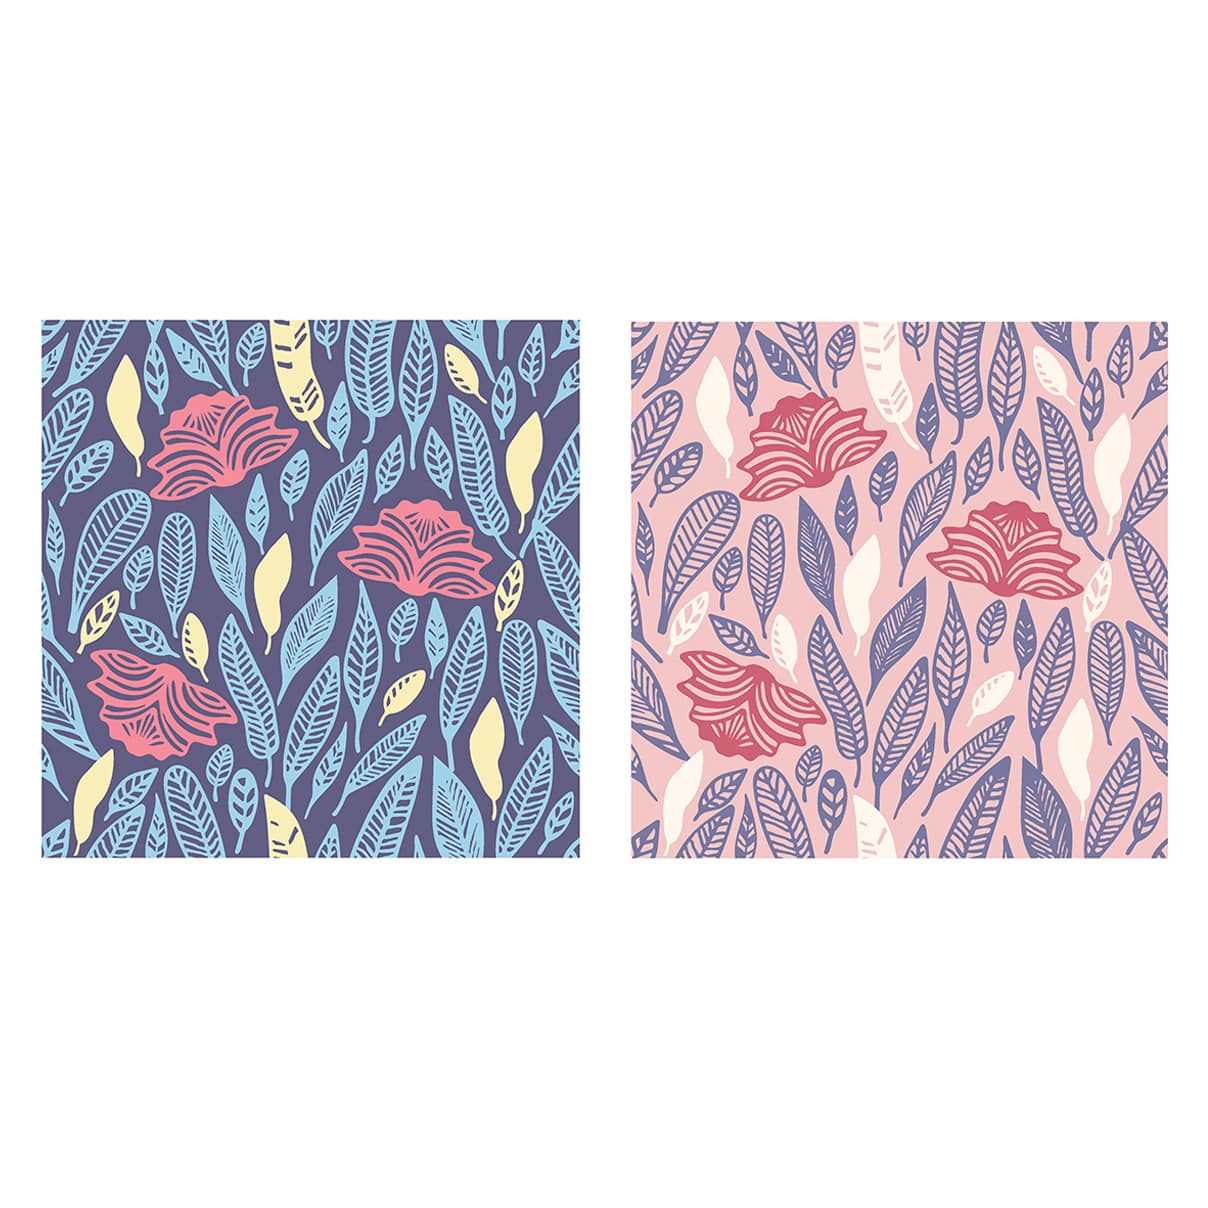 Floral Leaves Set & Seamless Patterns cover image.